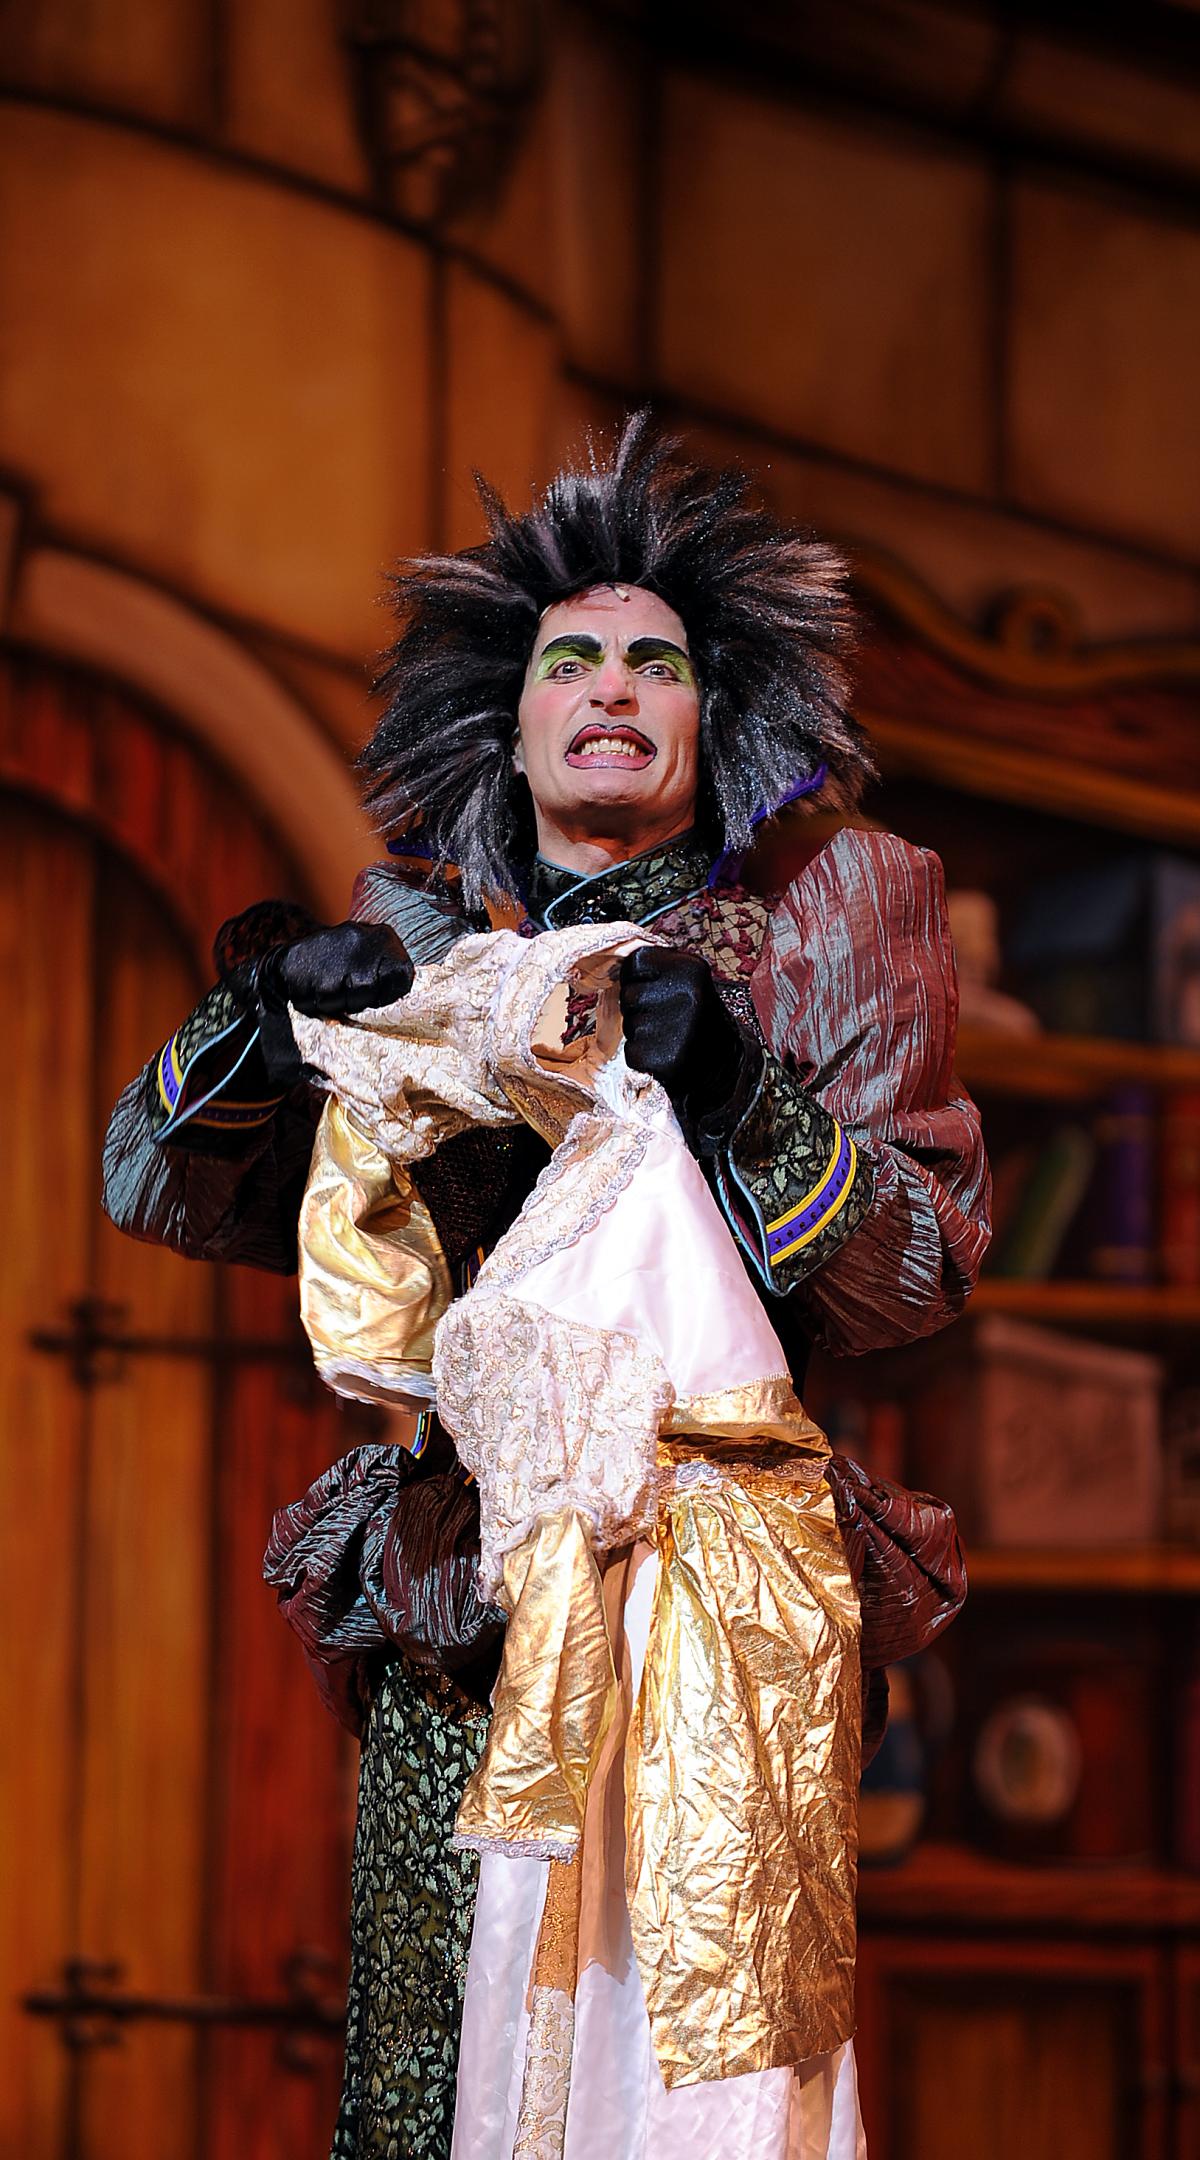 A scene from the Bradford Alhambra Theatre pantomime Cinderella, which stars Billy Pearce